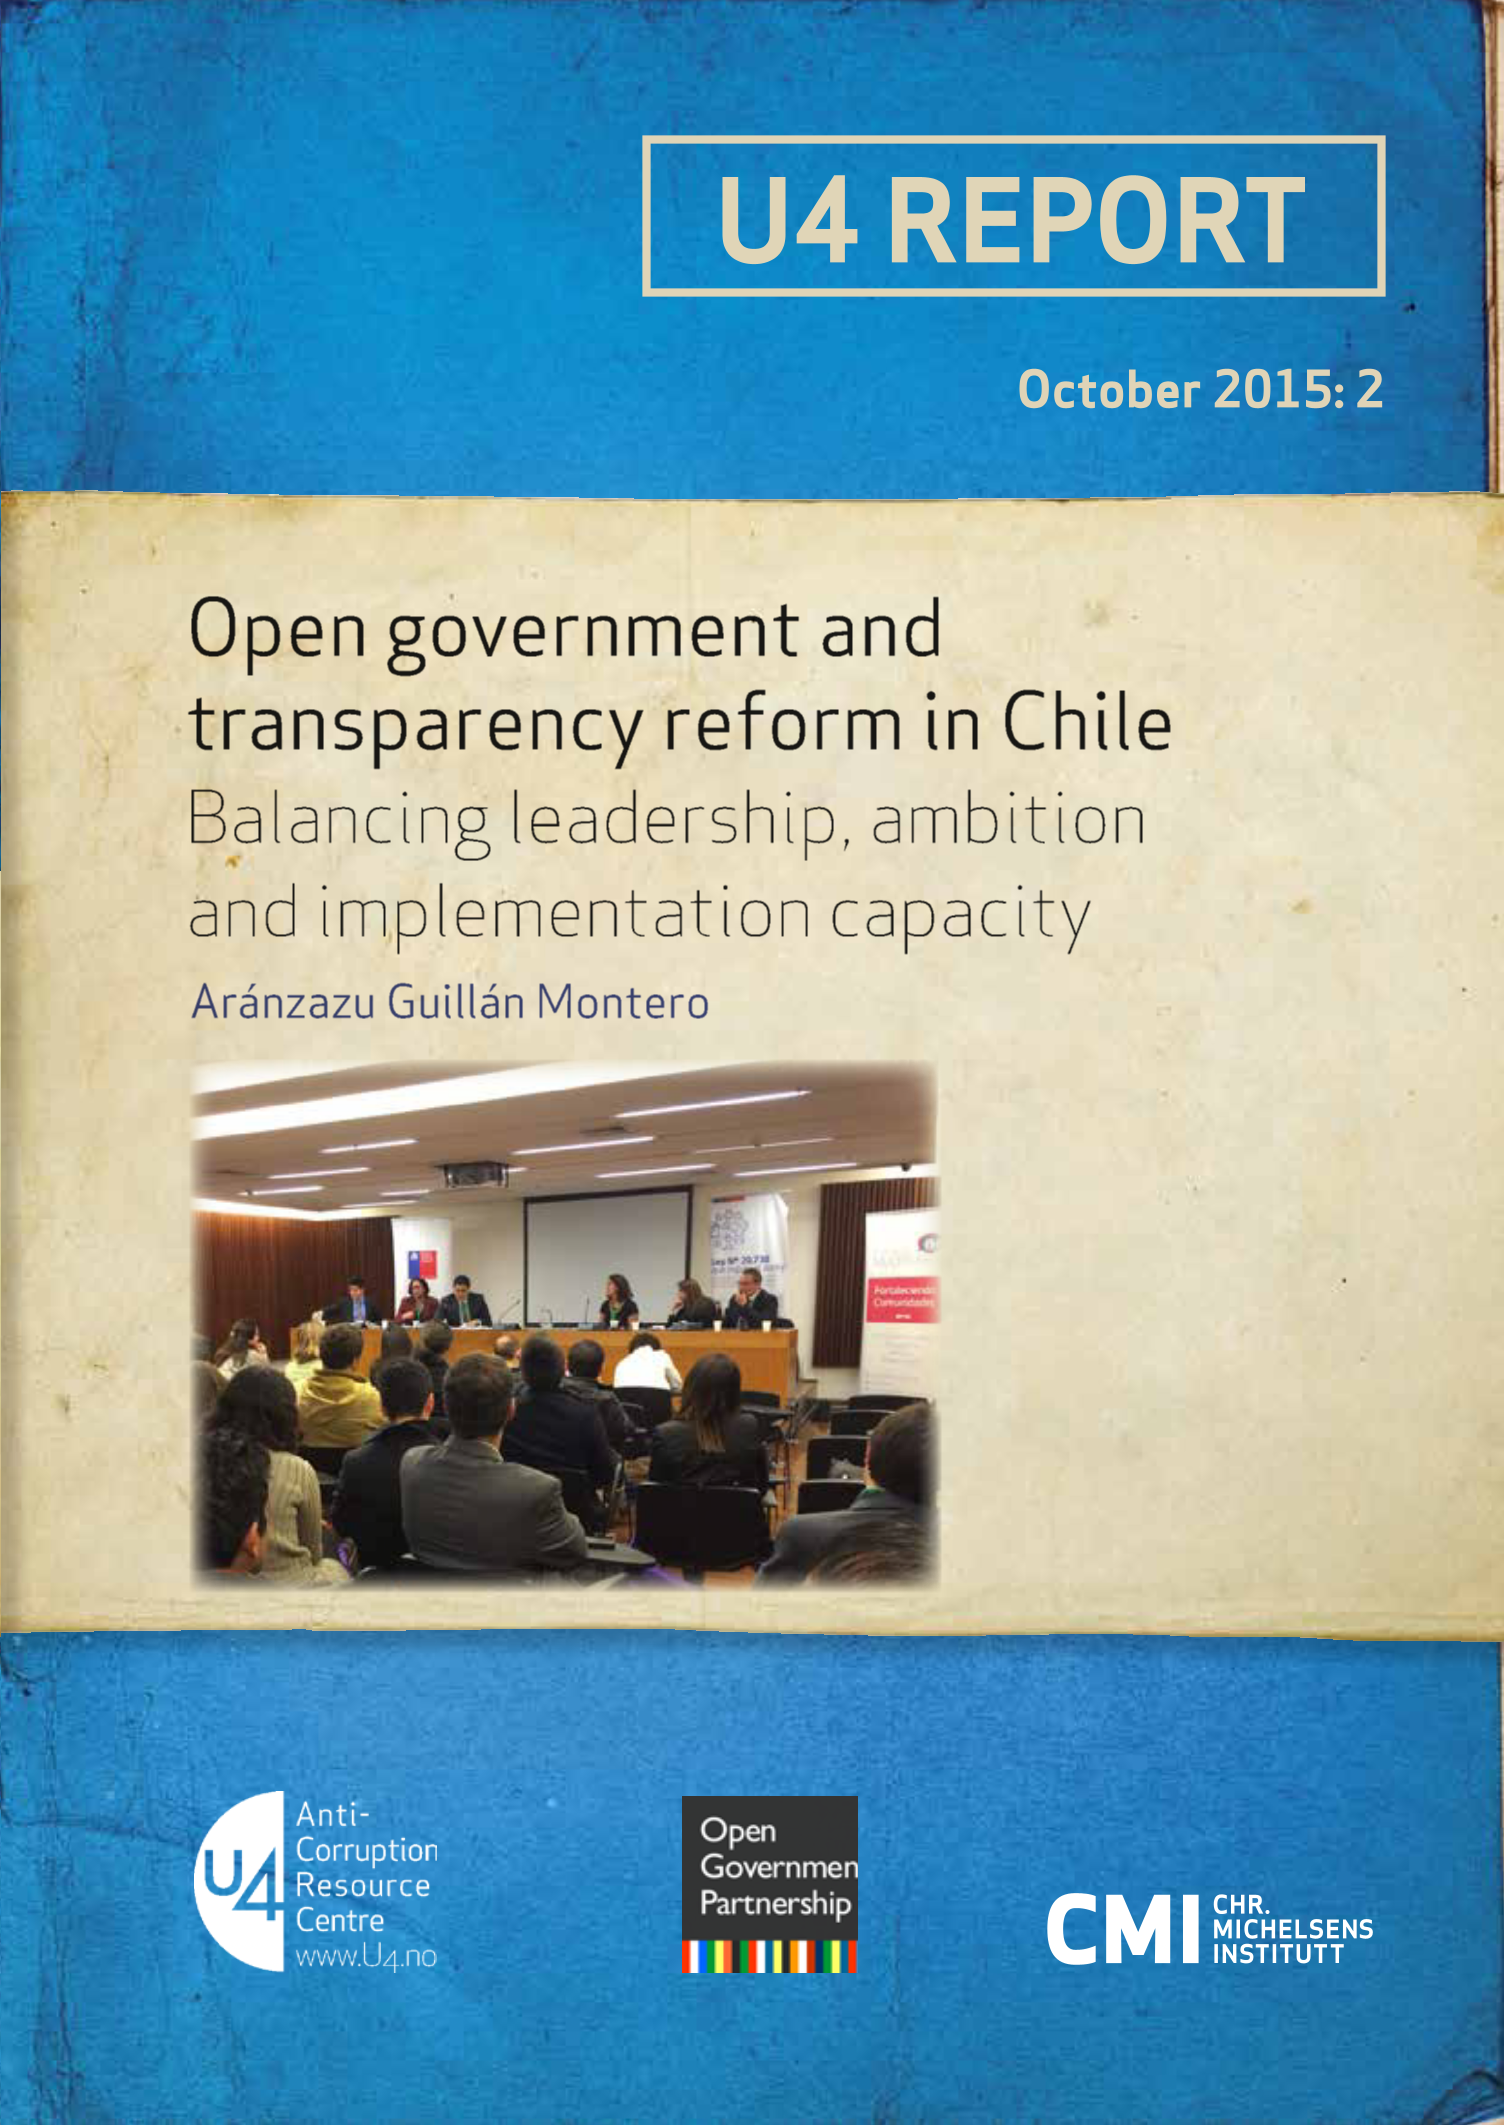 Open government and transparency reform in Chile: Balancing leadership, ambition and implementation capacity